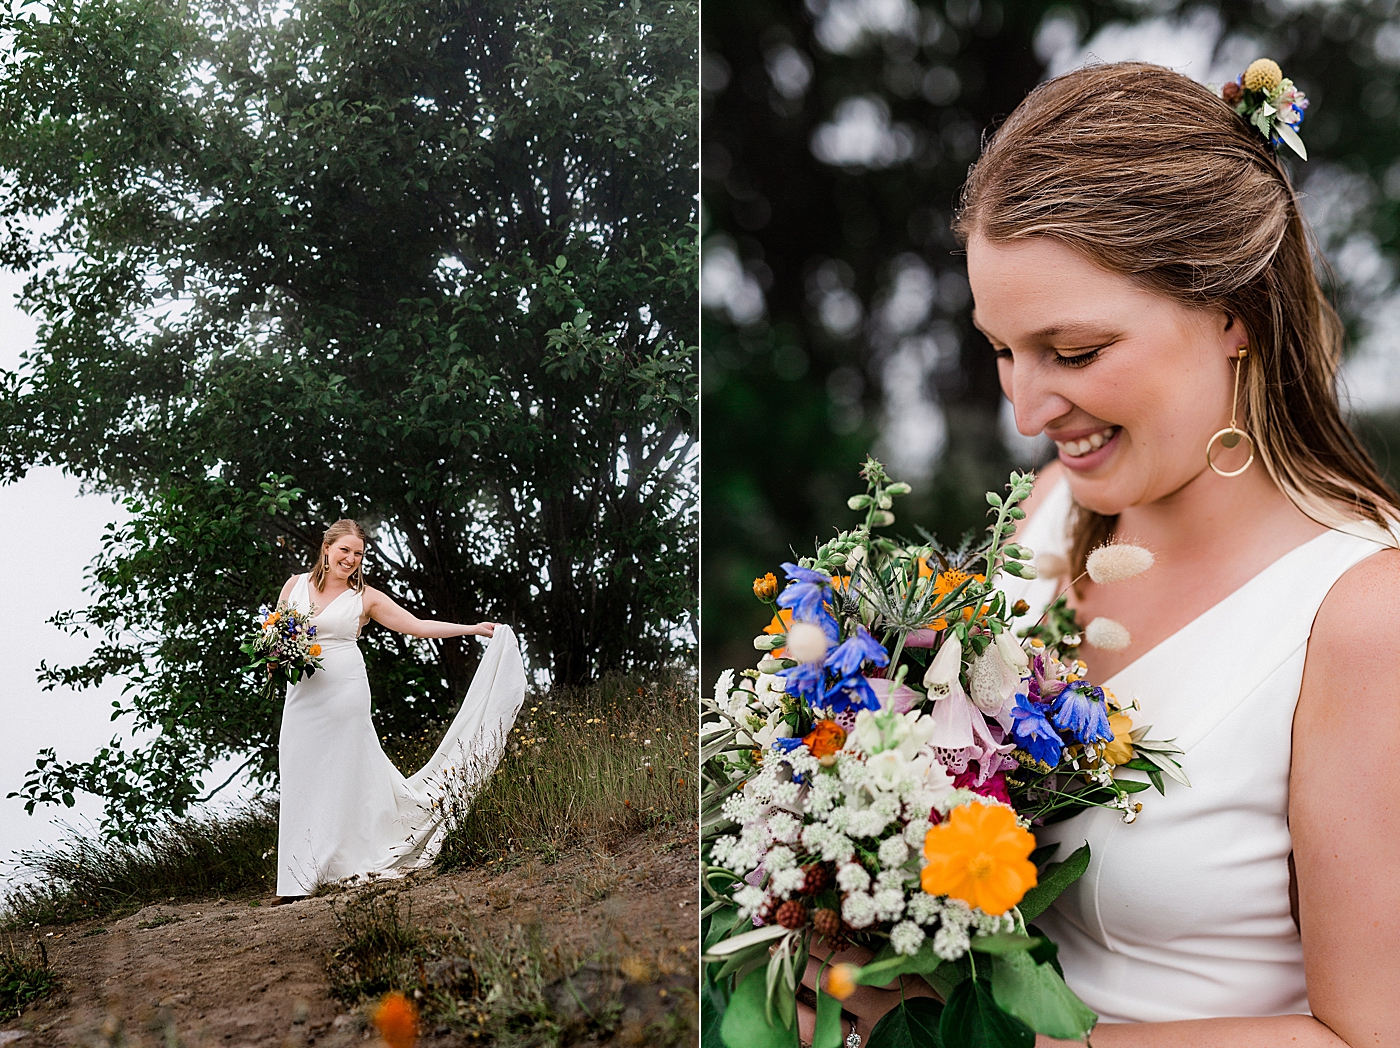 Bridal portraits in the rain at Mount St. Helens | Megan Montalvo Photography